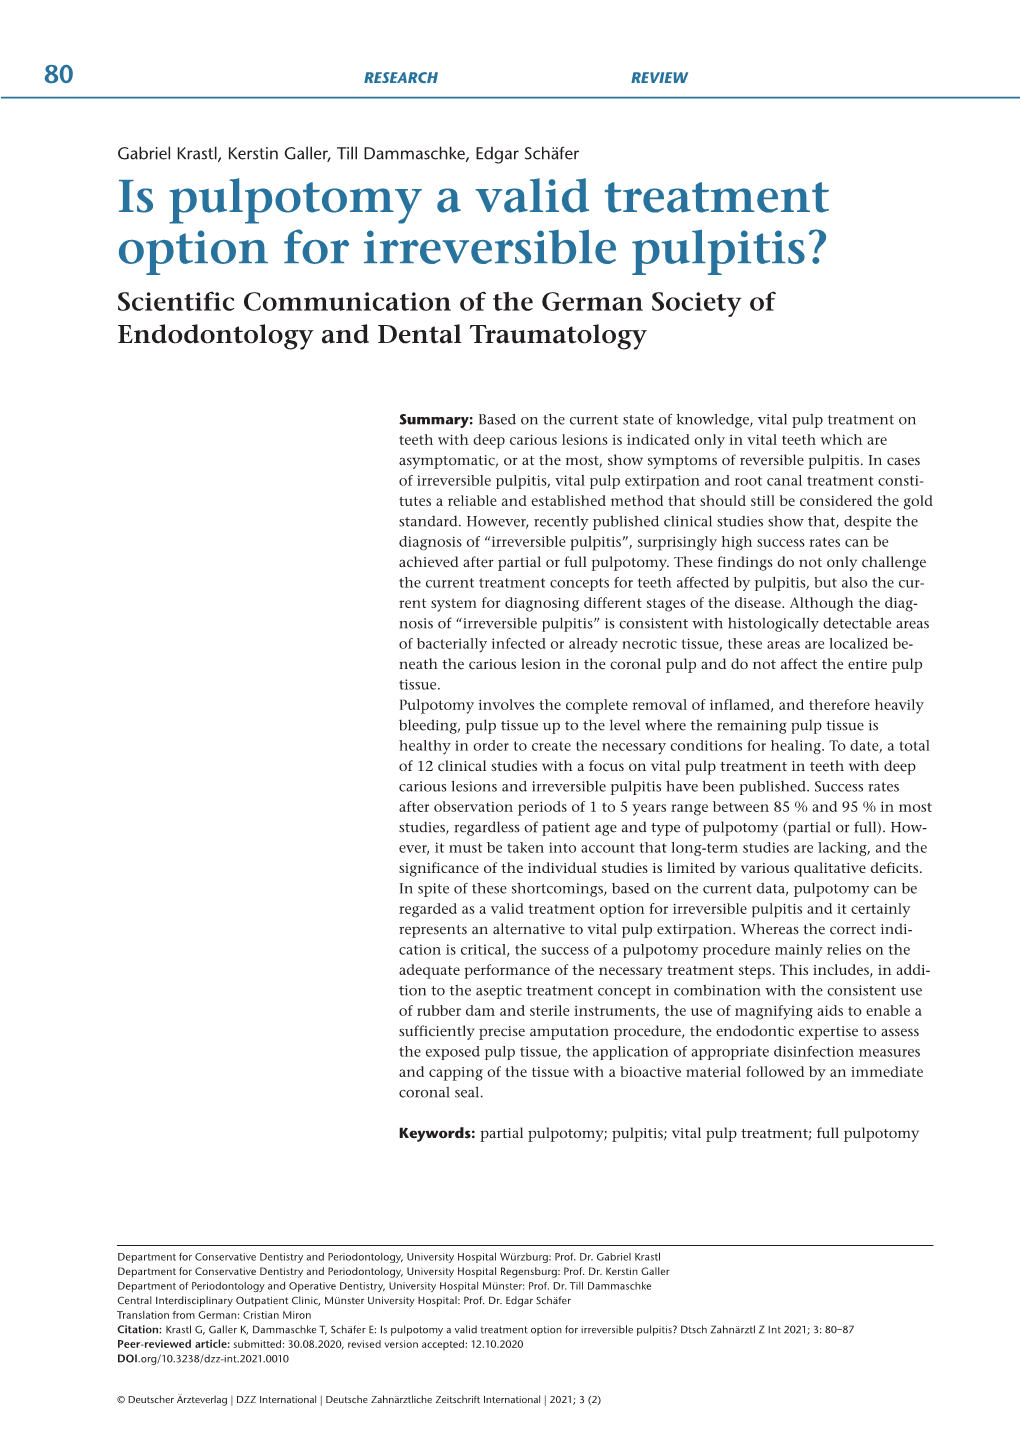 Is Pulpotomy a Valid Treatment Option for Irreversible Pulpitis? Scientific Communication of the German Society of Endodontology and Dental Traumatology